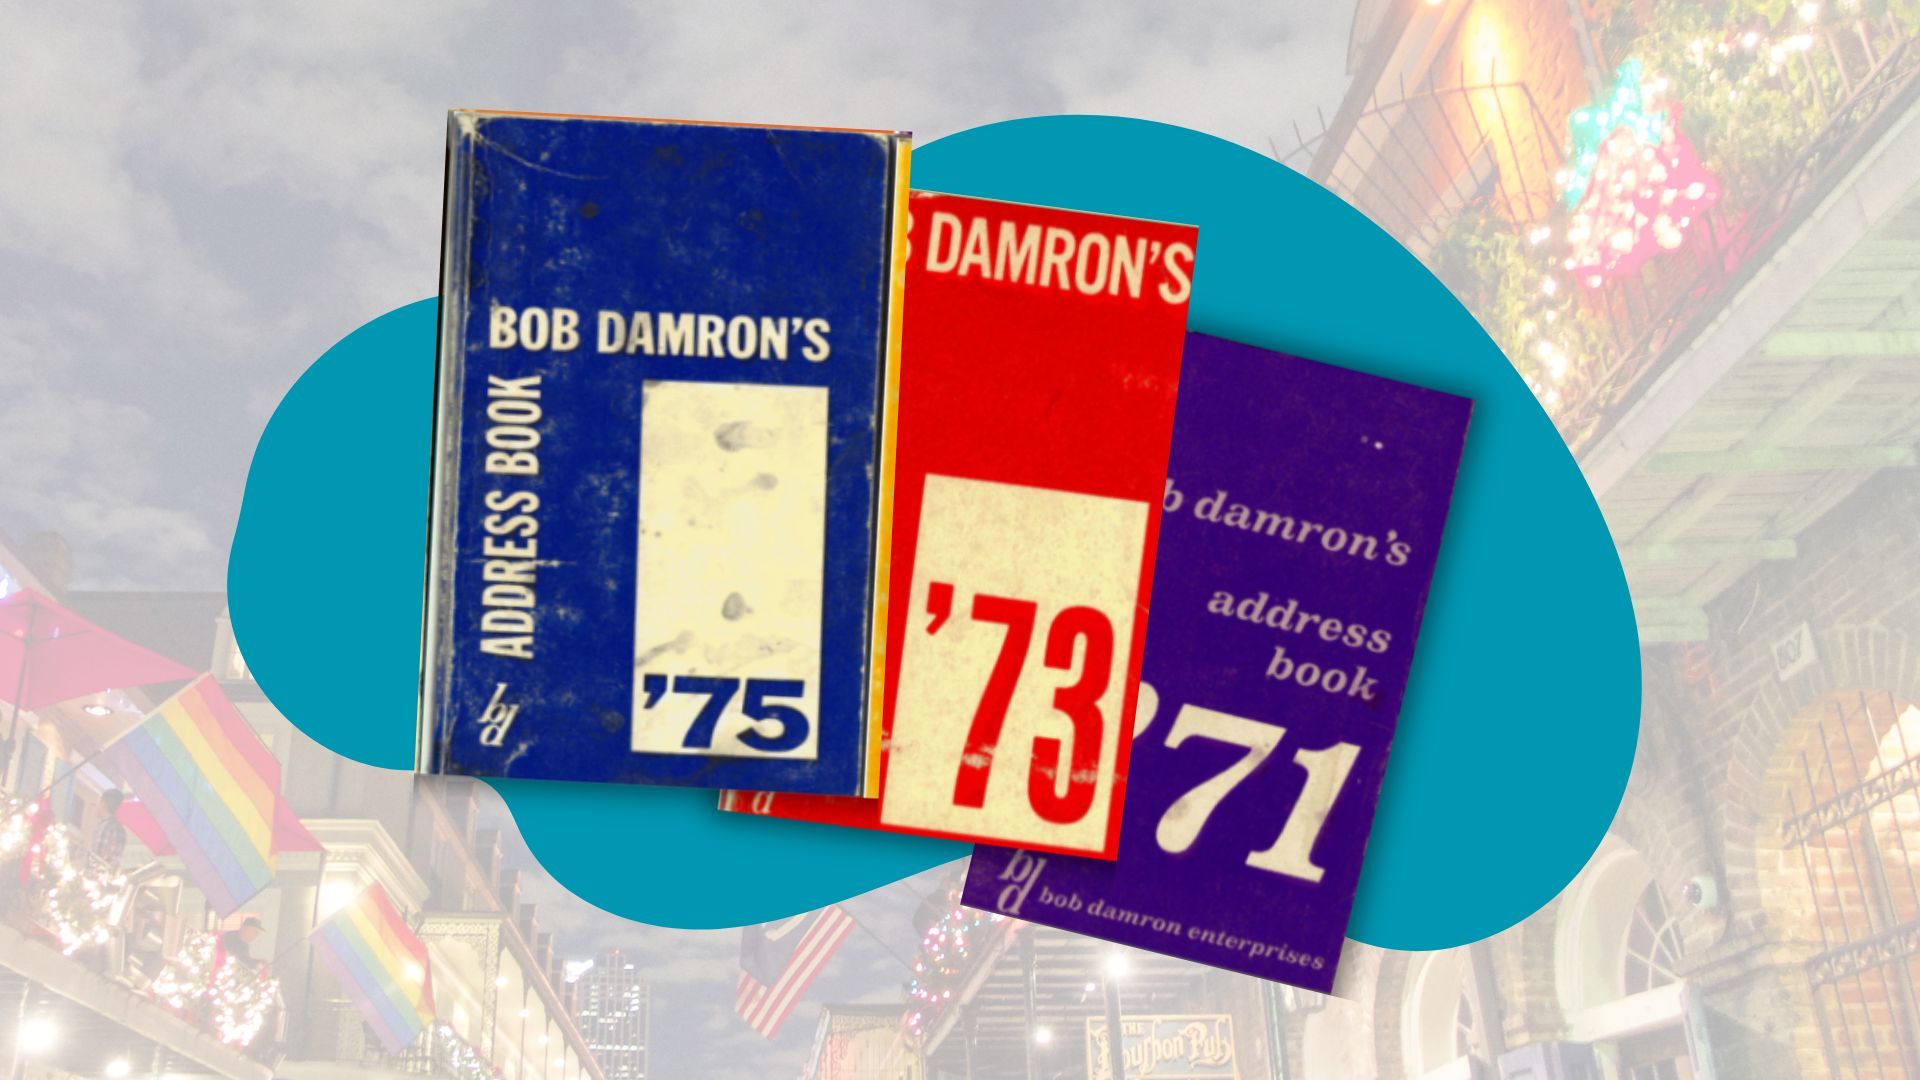 The Little Gay Travel Guide That Could: The Legacy of Bob Damron’s Address Book